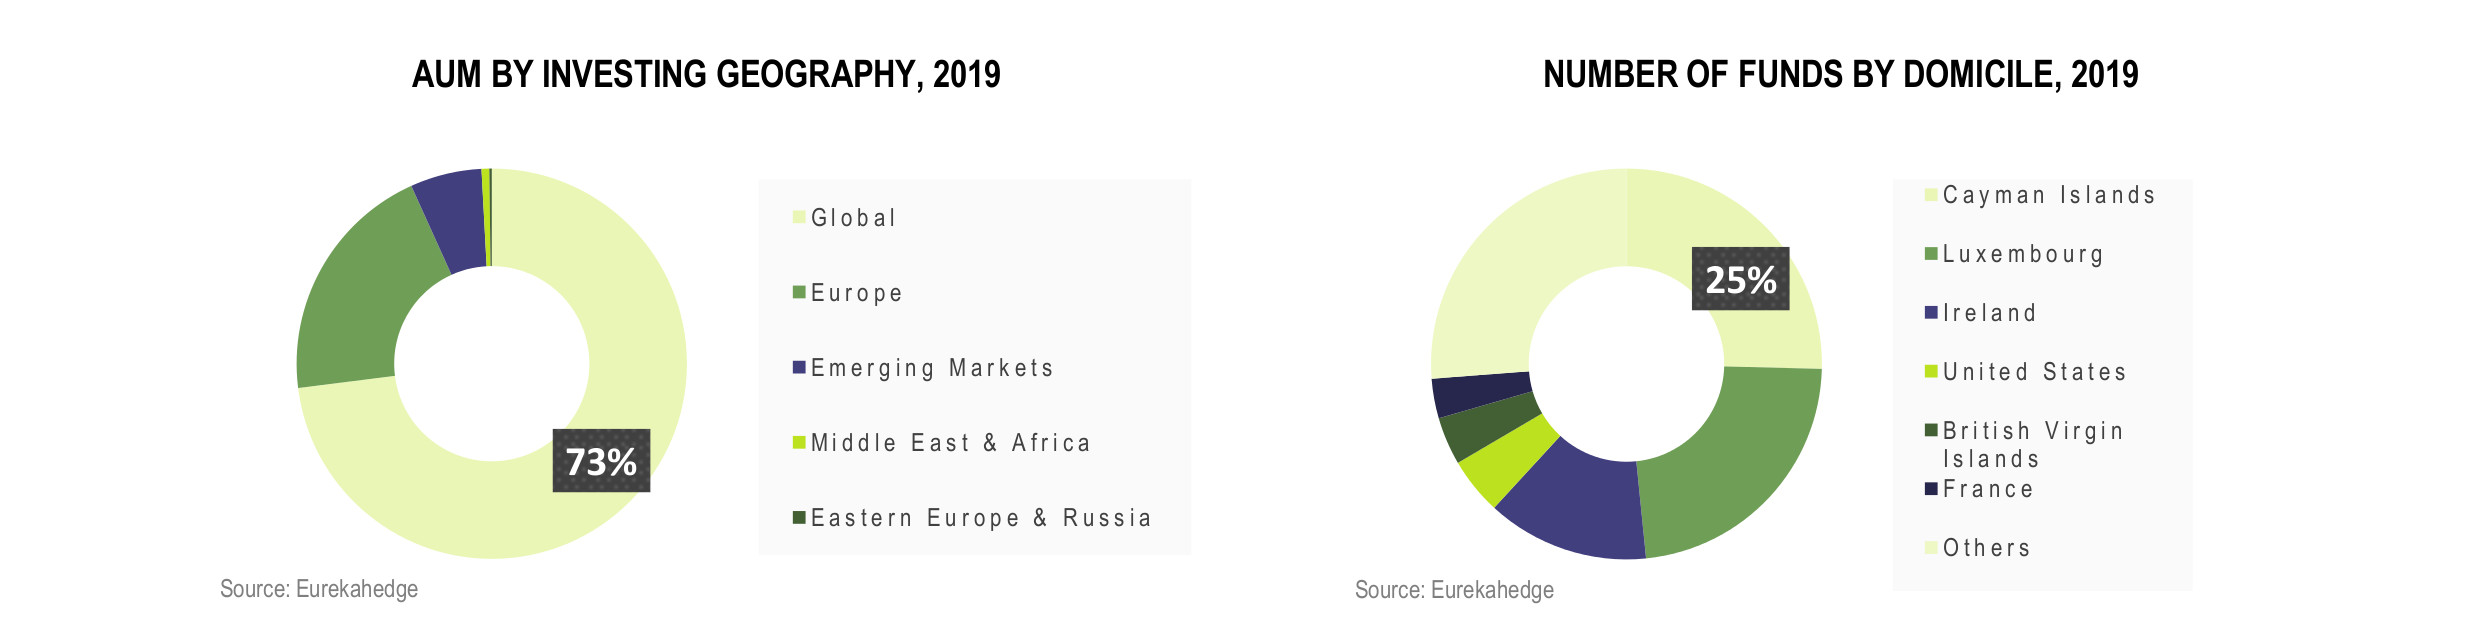 European Hedge Funds Infographic December 2019 - AUM by investing geography and number of funds by domicile